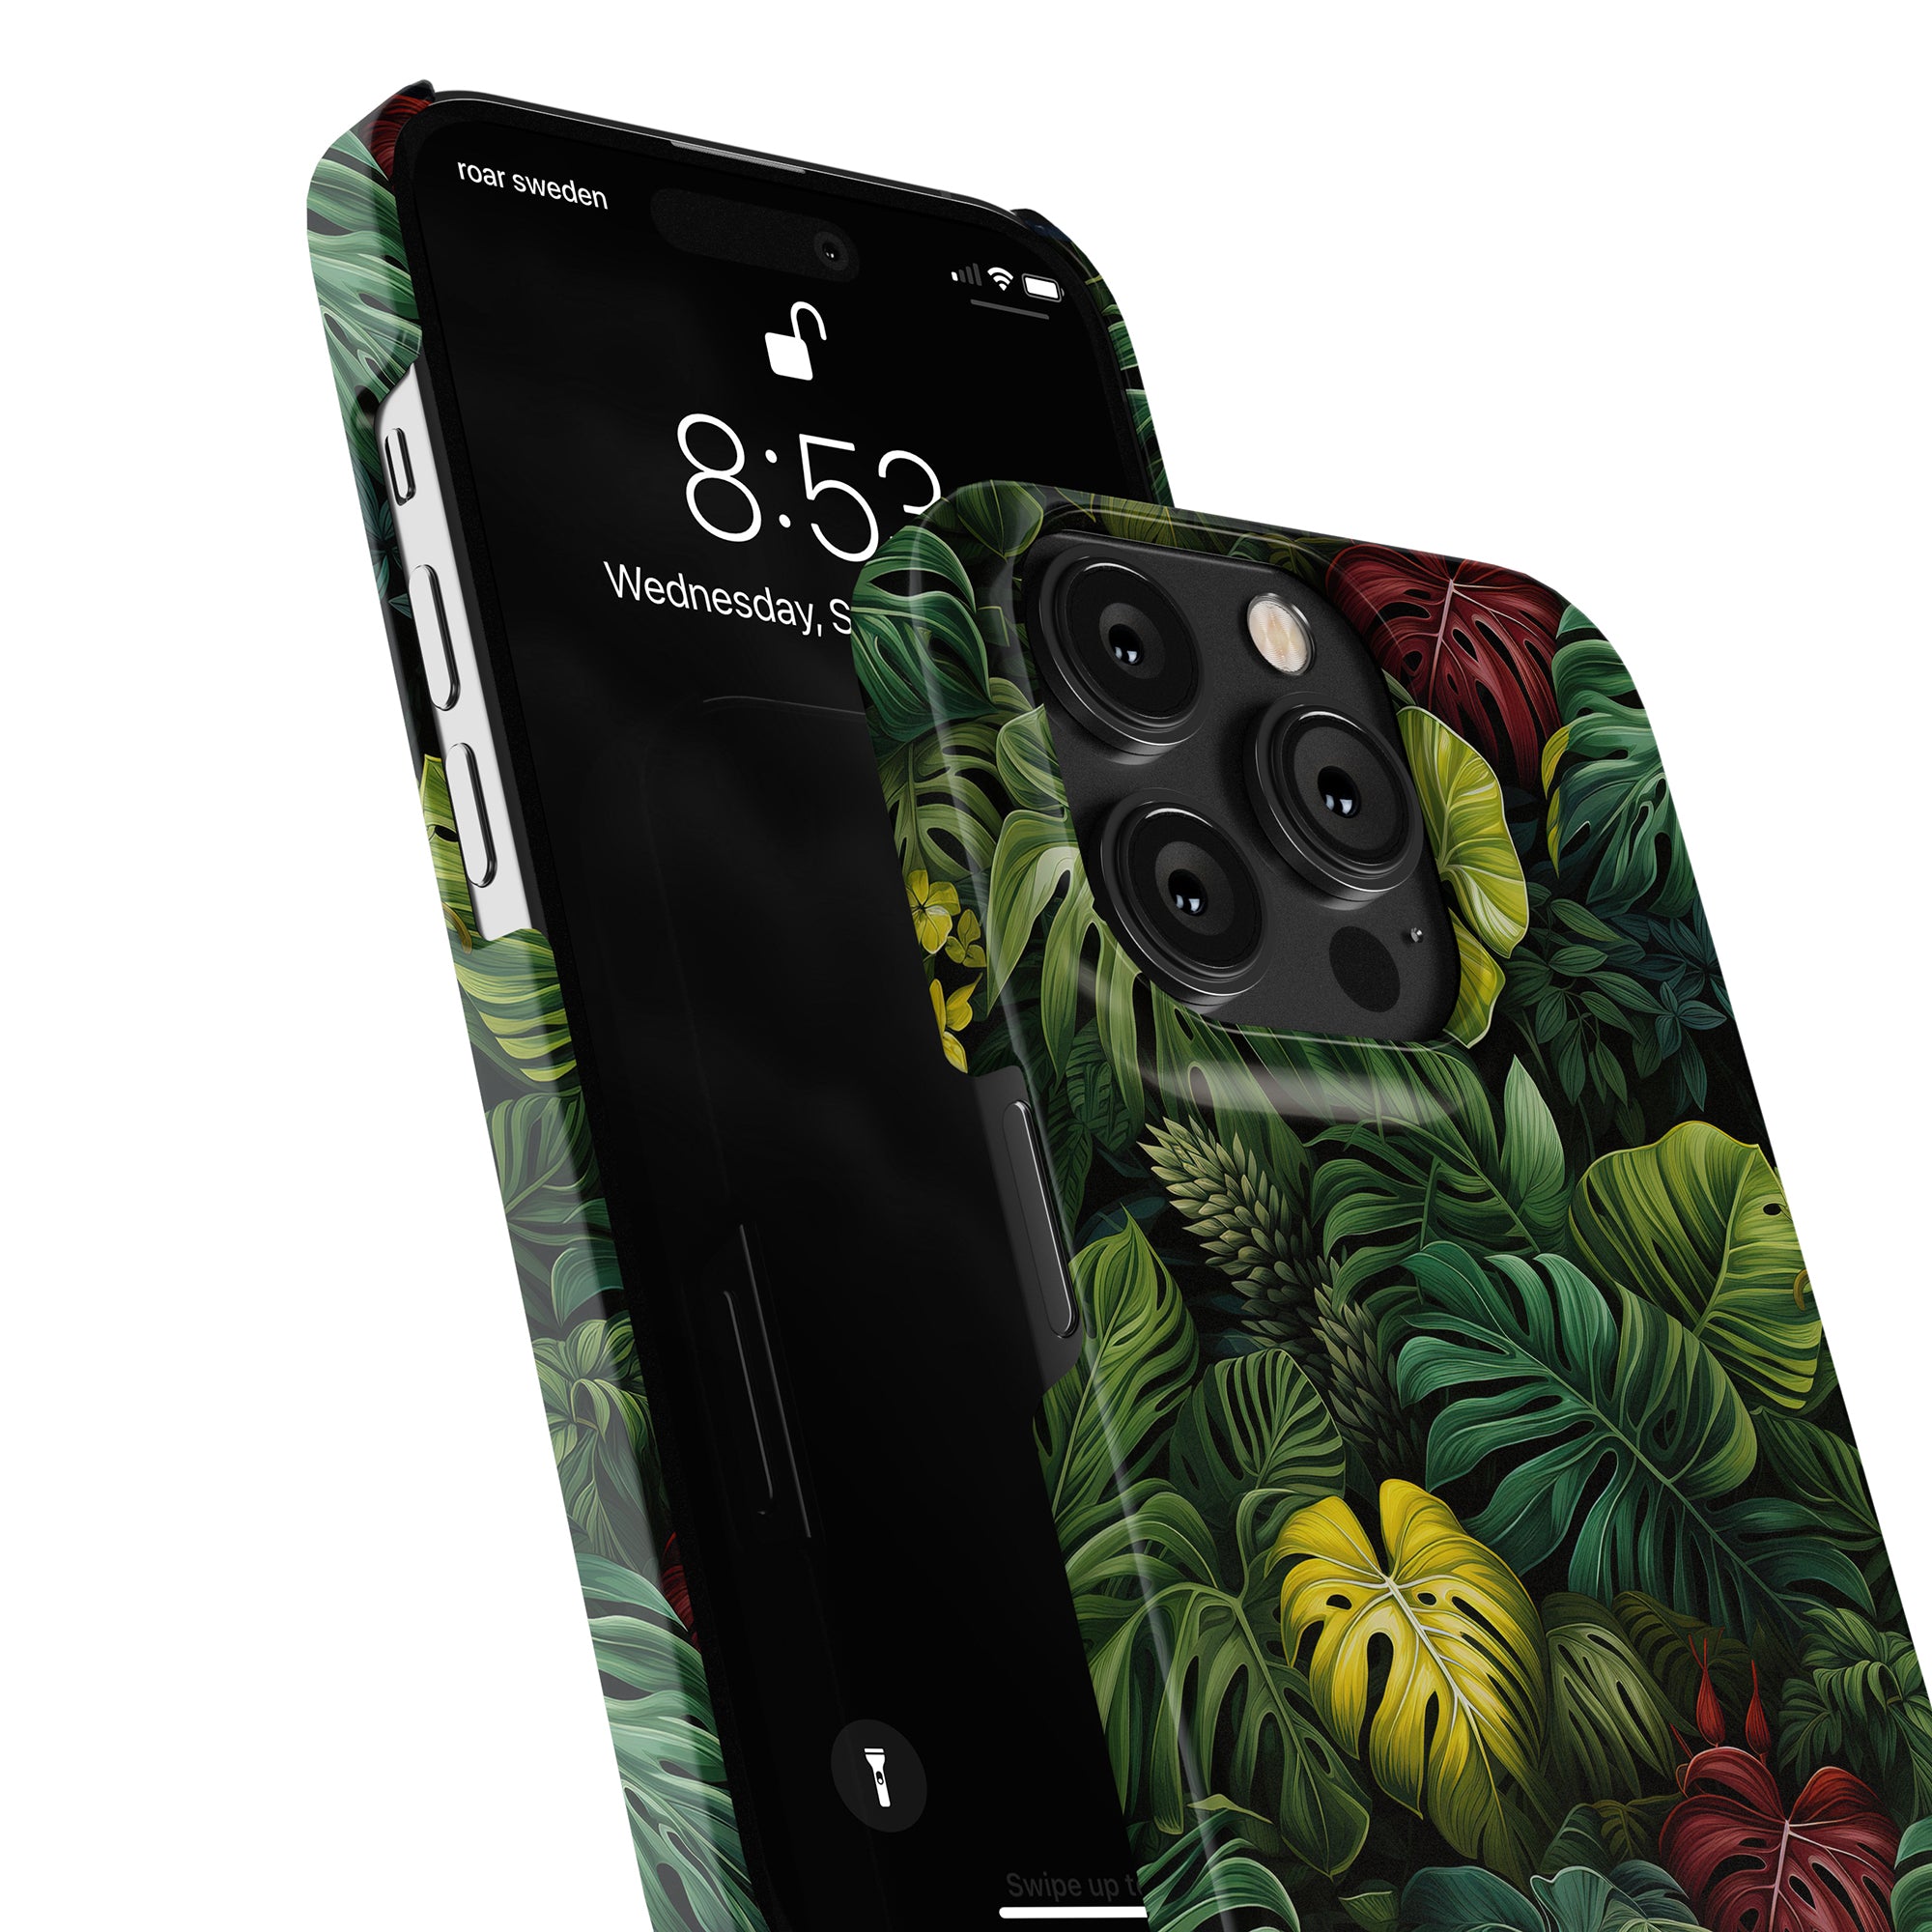 Close-up view of a smartphone with a leafy green tropical-themed case from the Deliciosa - Slim case covering the back and sides. The Monstera Deliciosa design adds a touch of nature's charm. The phone screen displays the time and date.